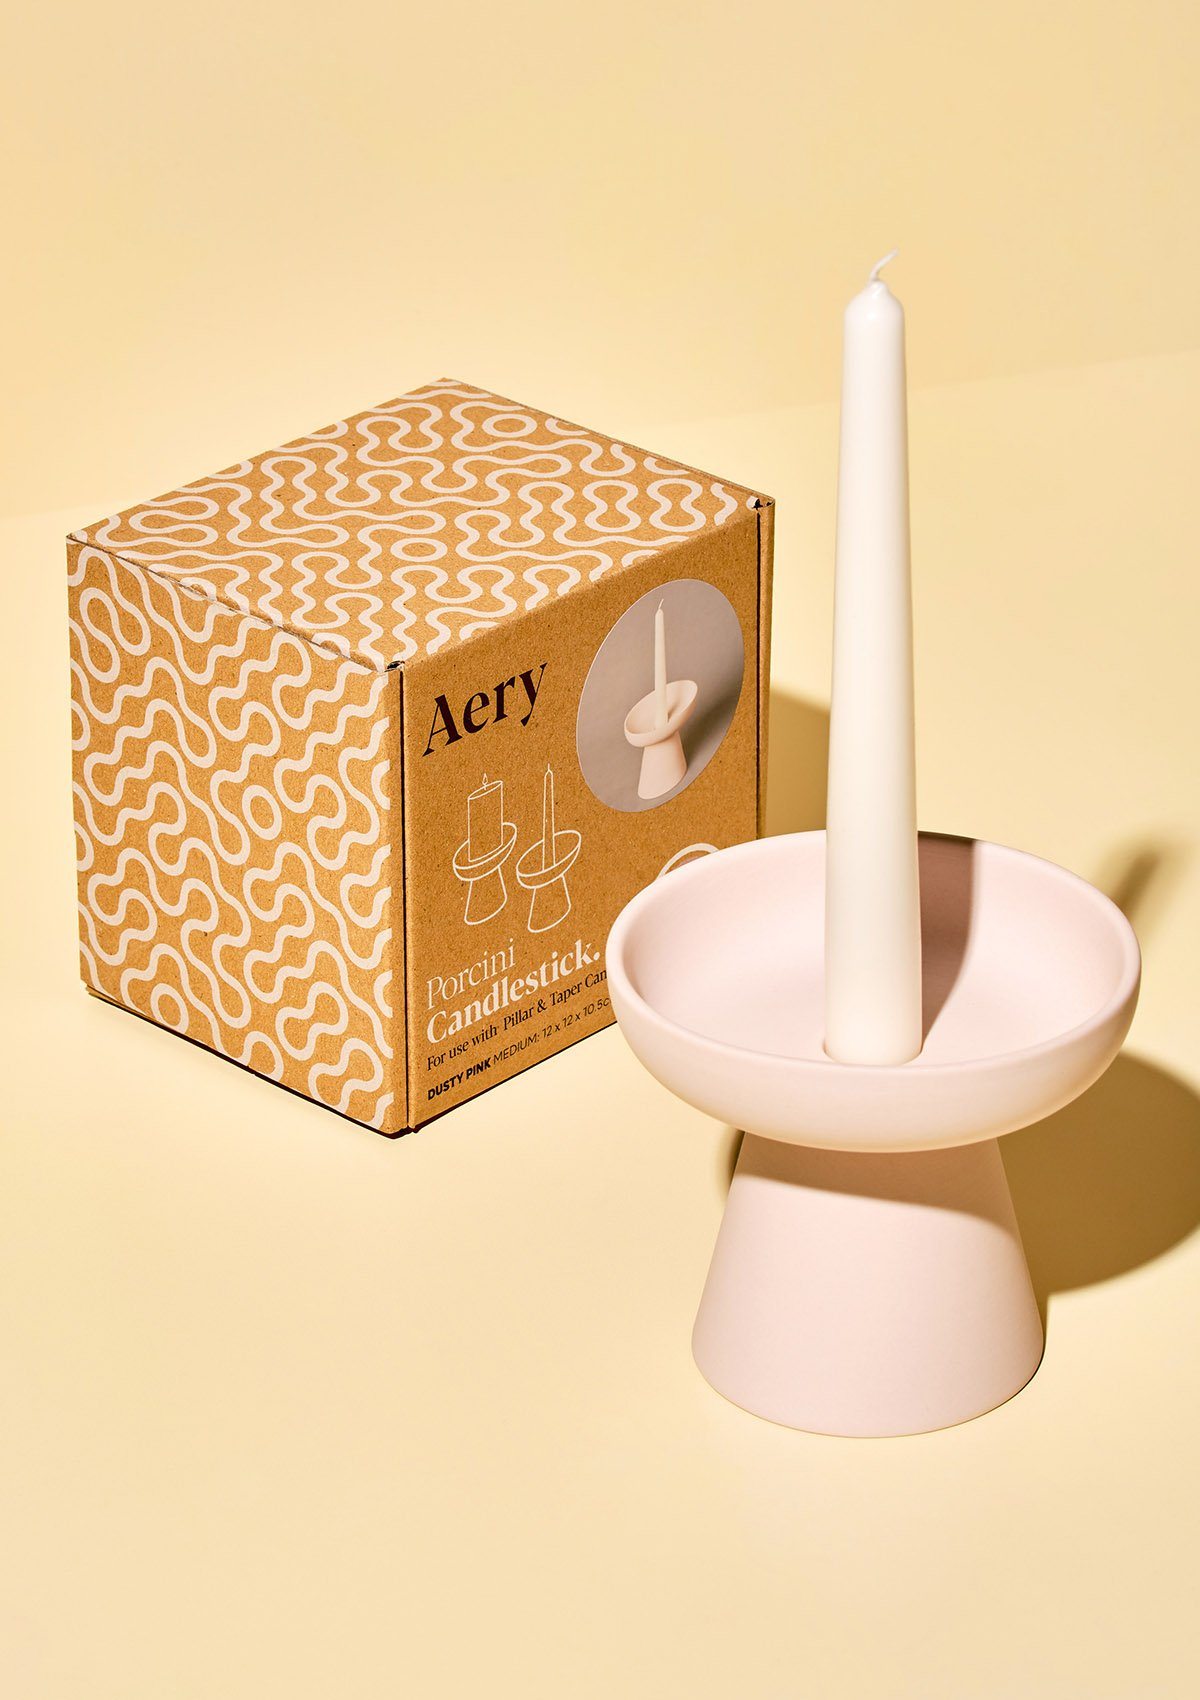 aery living soft pink ceramic candle holder displayed with white tapered candle and product packaging against a yellow background